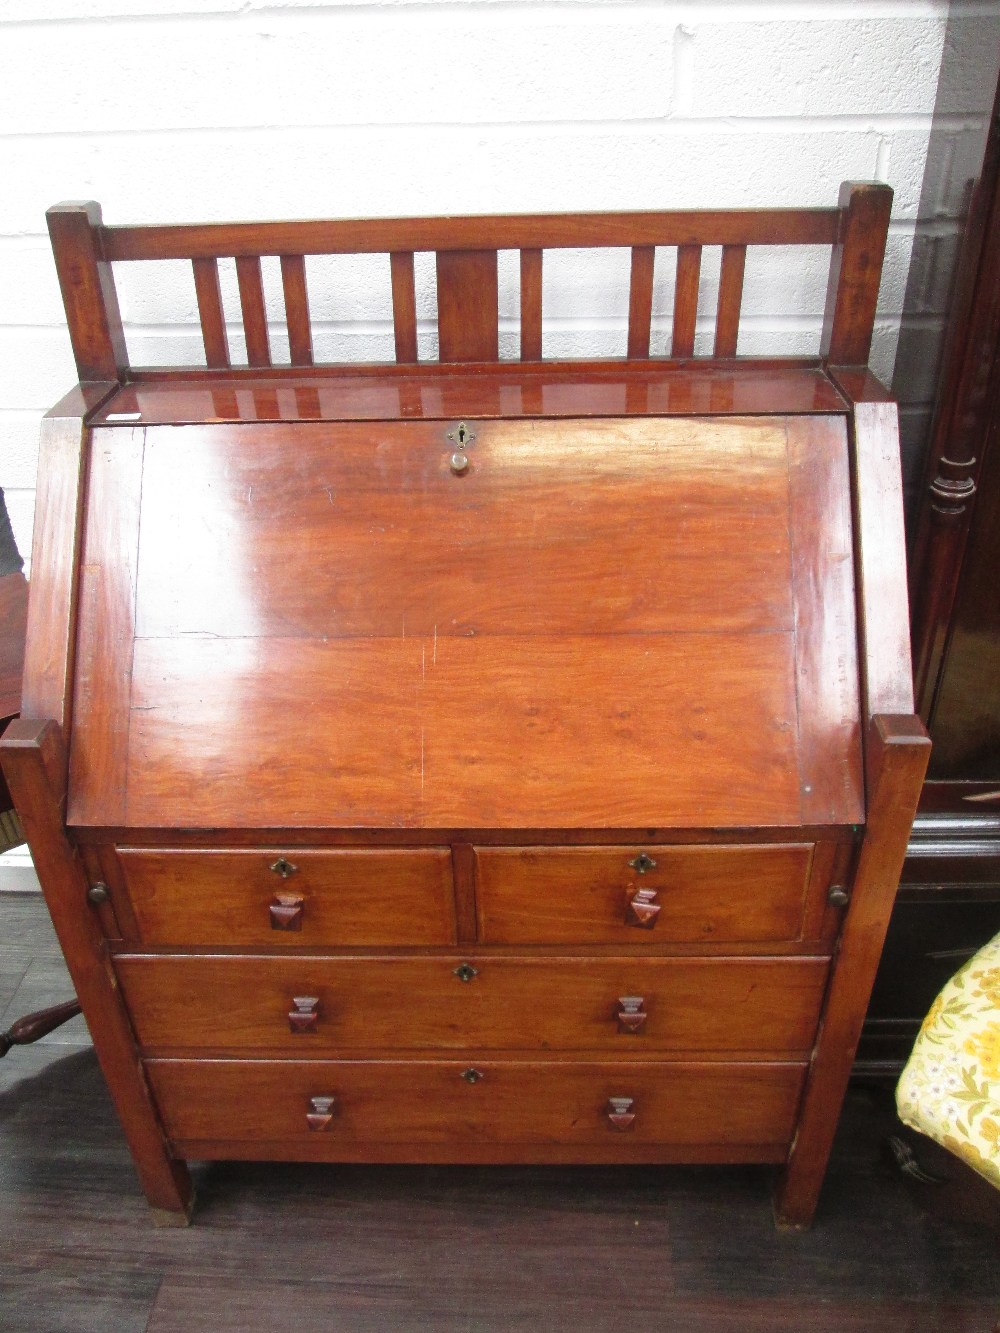 An early 20th century mahogany bureau in the Arts & Crafts style having slatted superstructure over